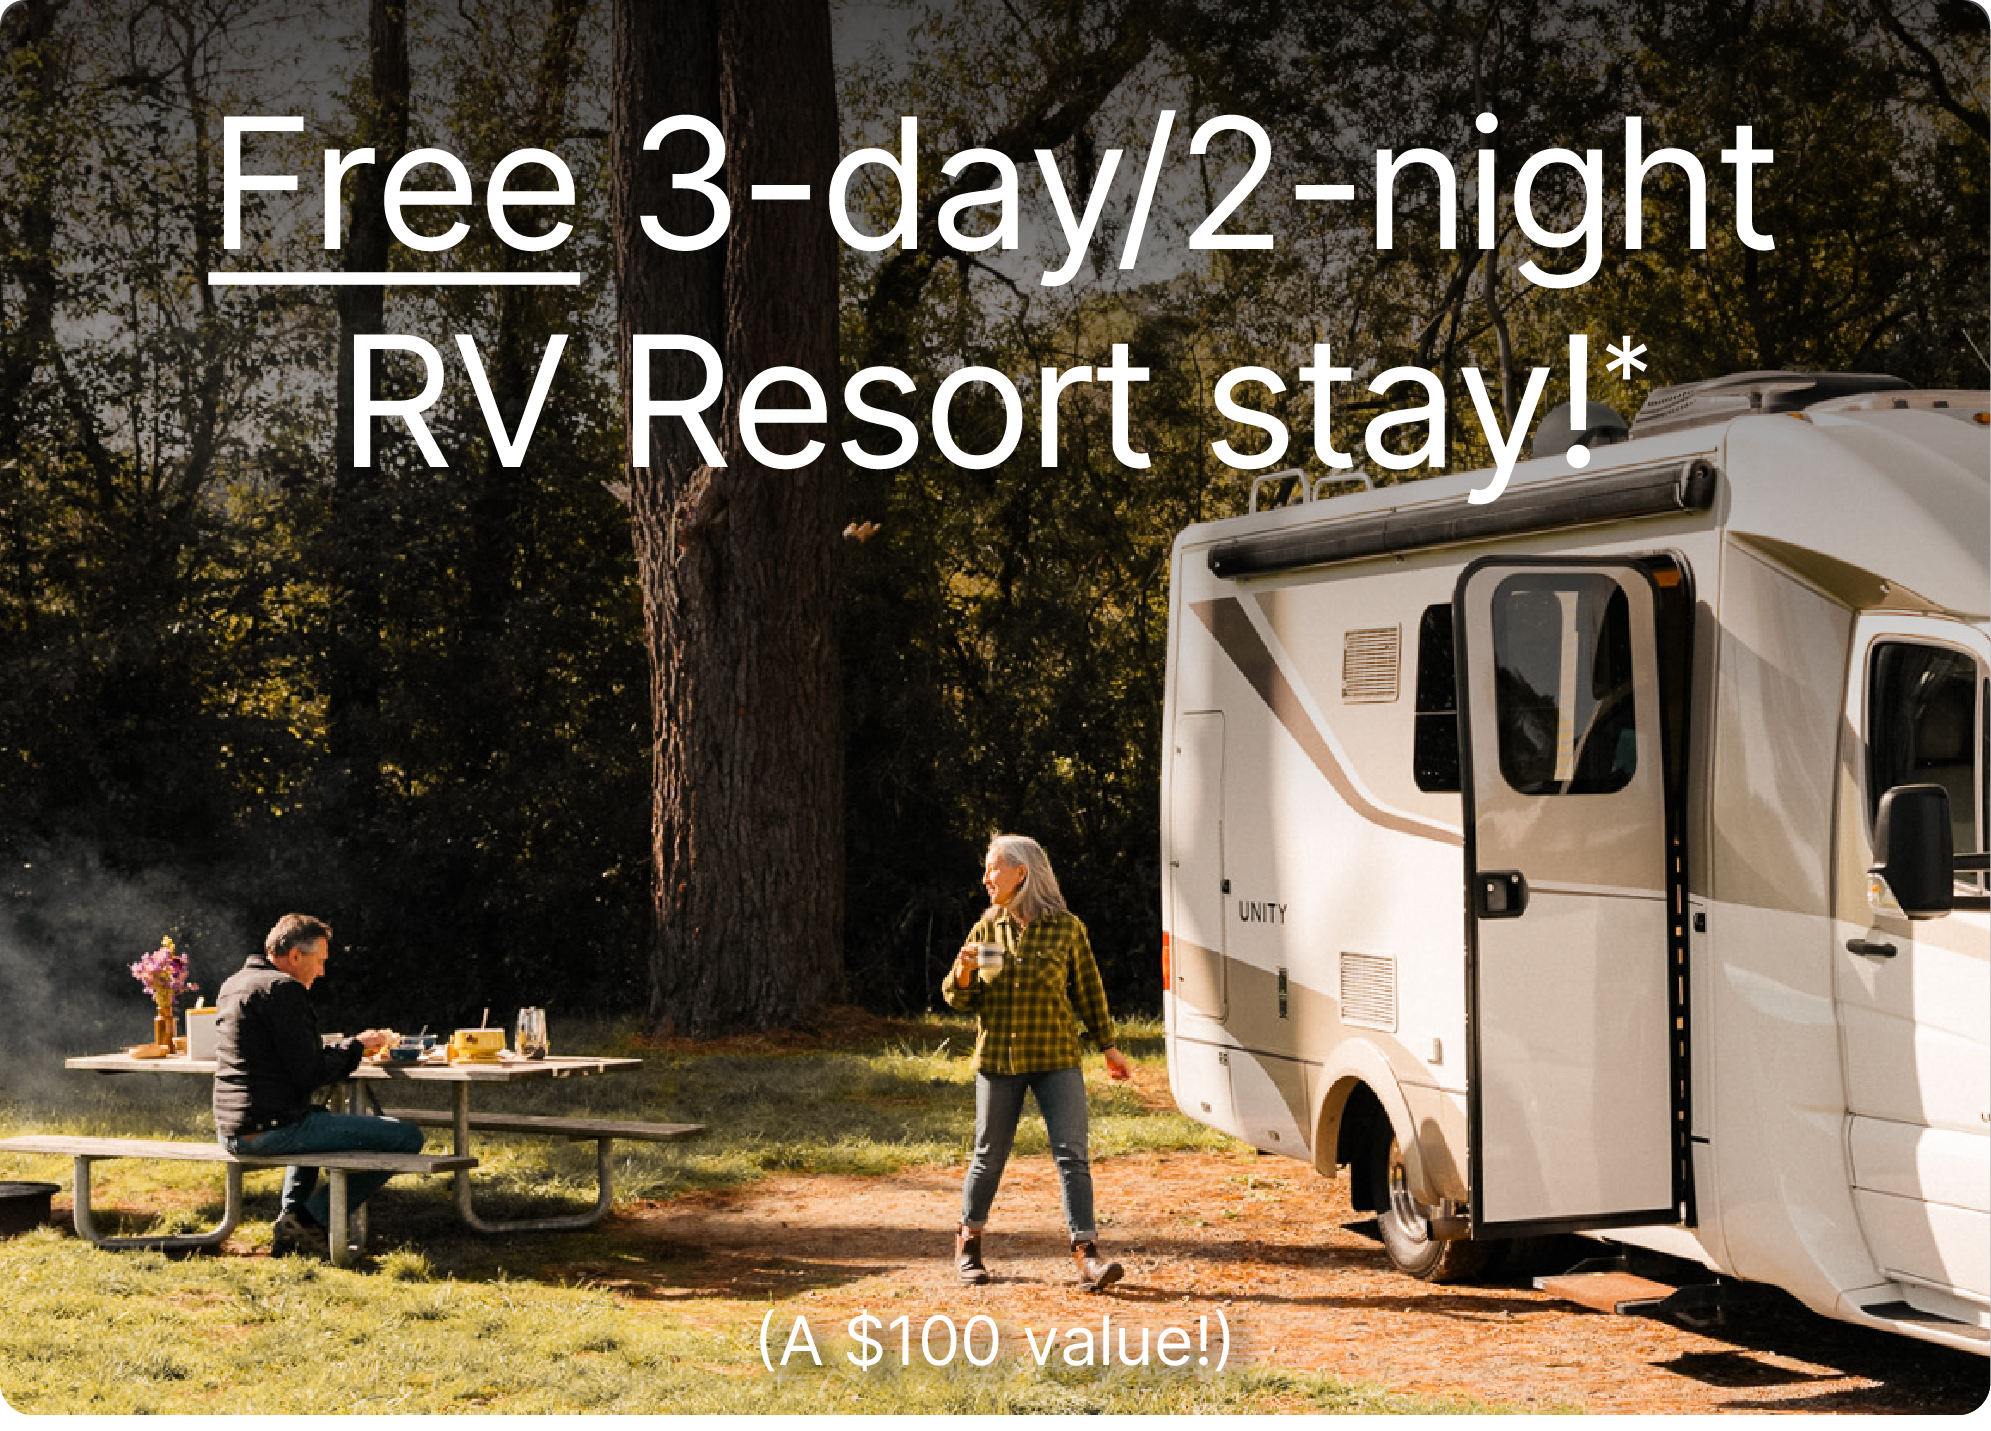 Free 3-day / 2-night RV stay!* A $100 value!